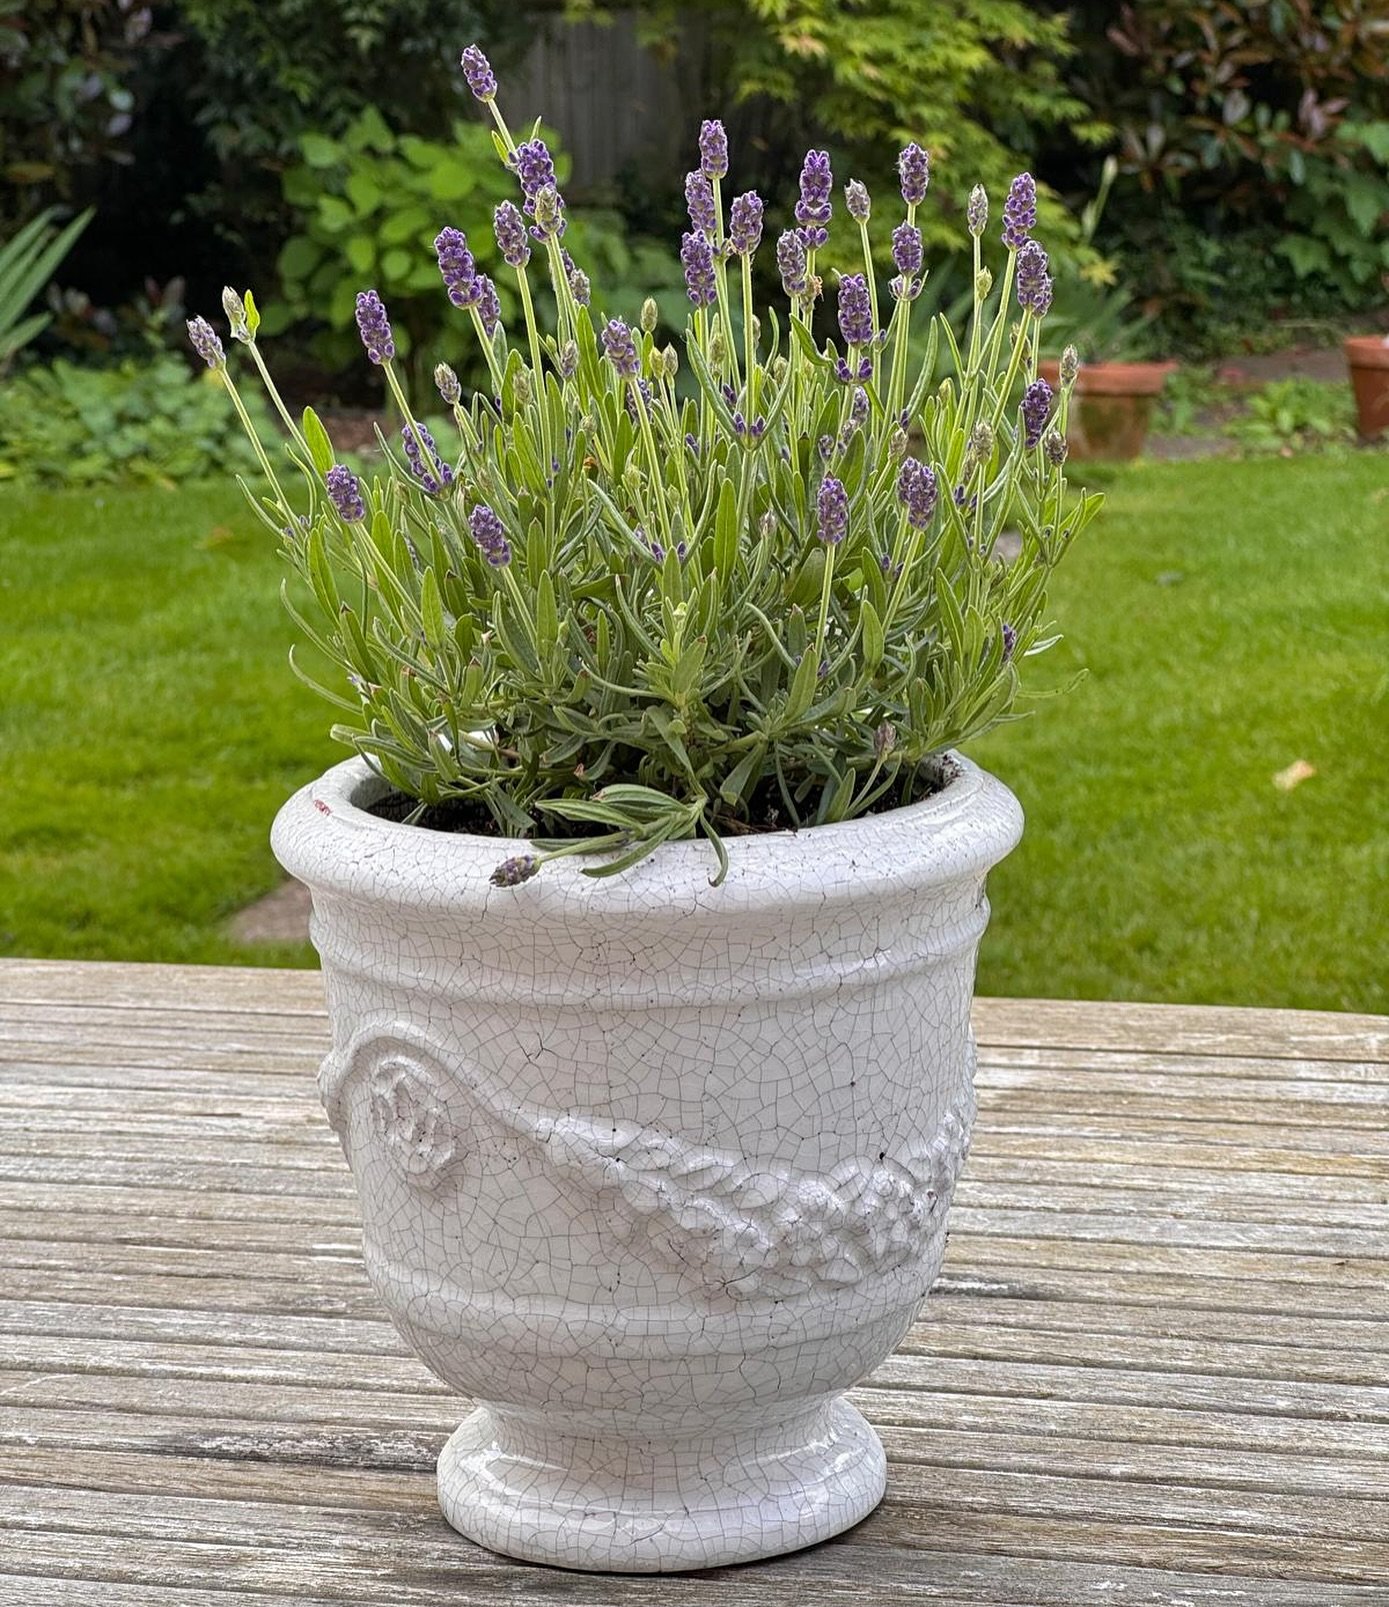 We have put a few new pots and vases onto our website. This beautiful crackled effect urn has been a big favourite with only a few left in stock&hellip;! (Don&rsquo;t worry, more are on their way!) 

#pots #potsandplants #potsandvases #vases #flowers